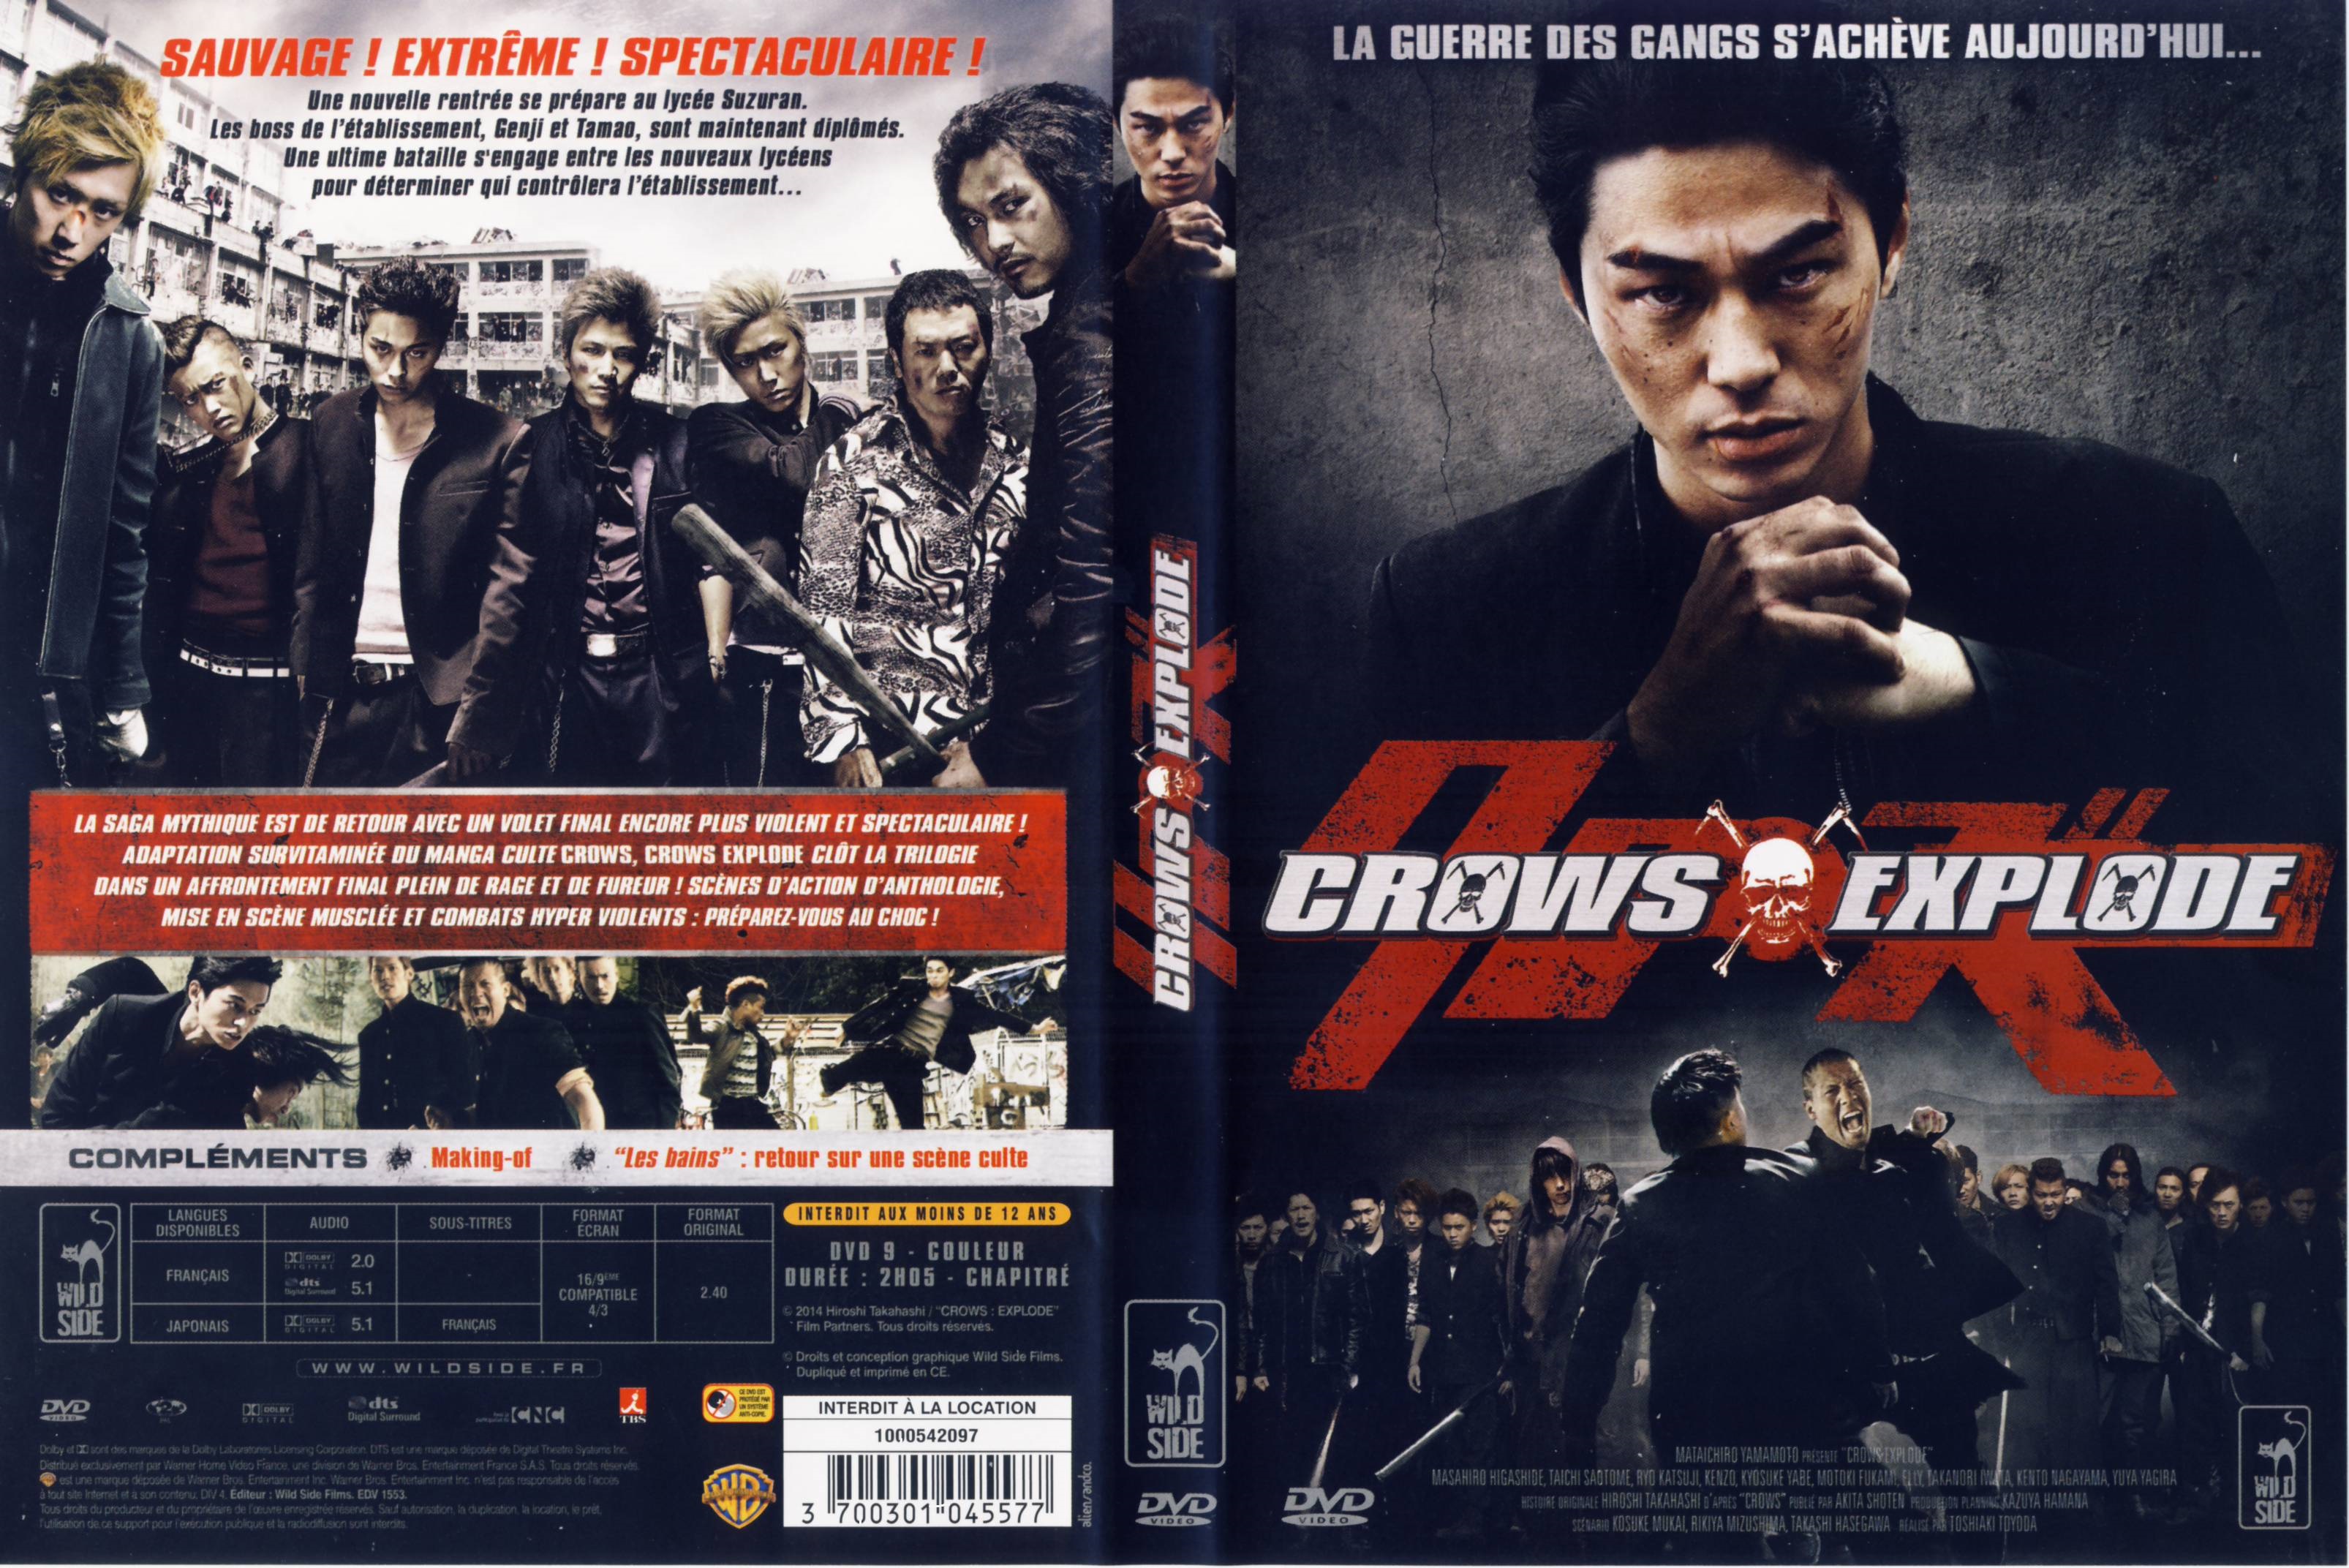 Jaquette DVD Crows Explode